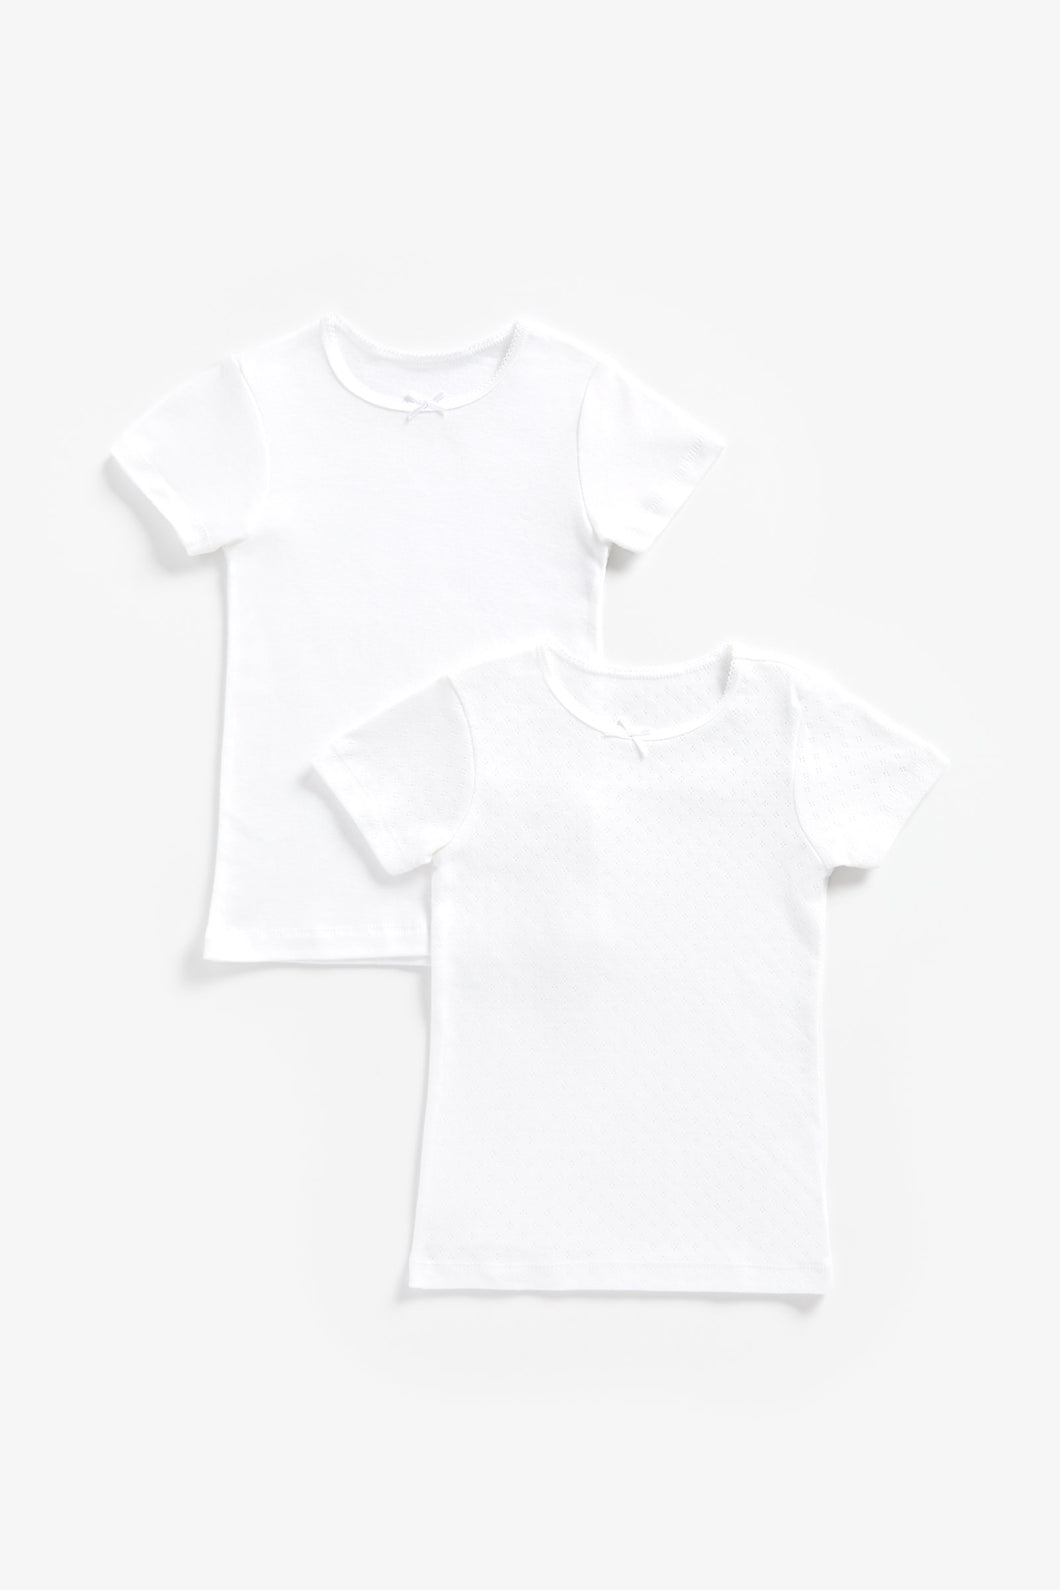 Mothercare White Short-Sleeved Vests - 2 Pack